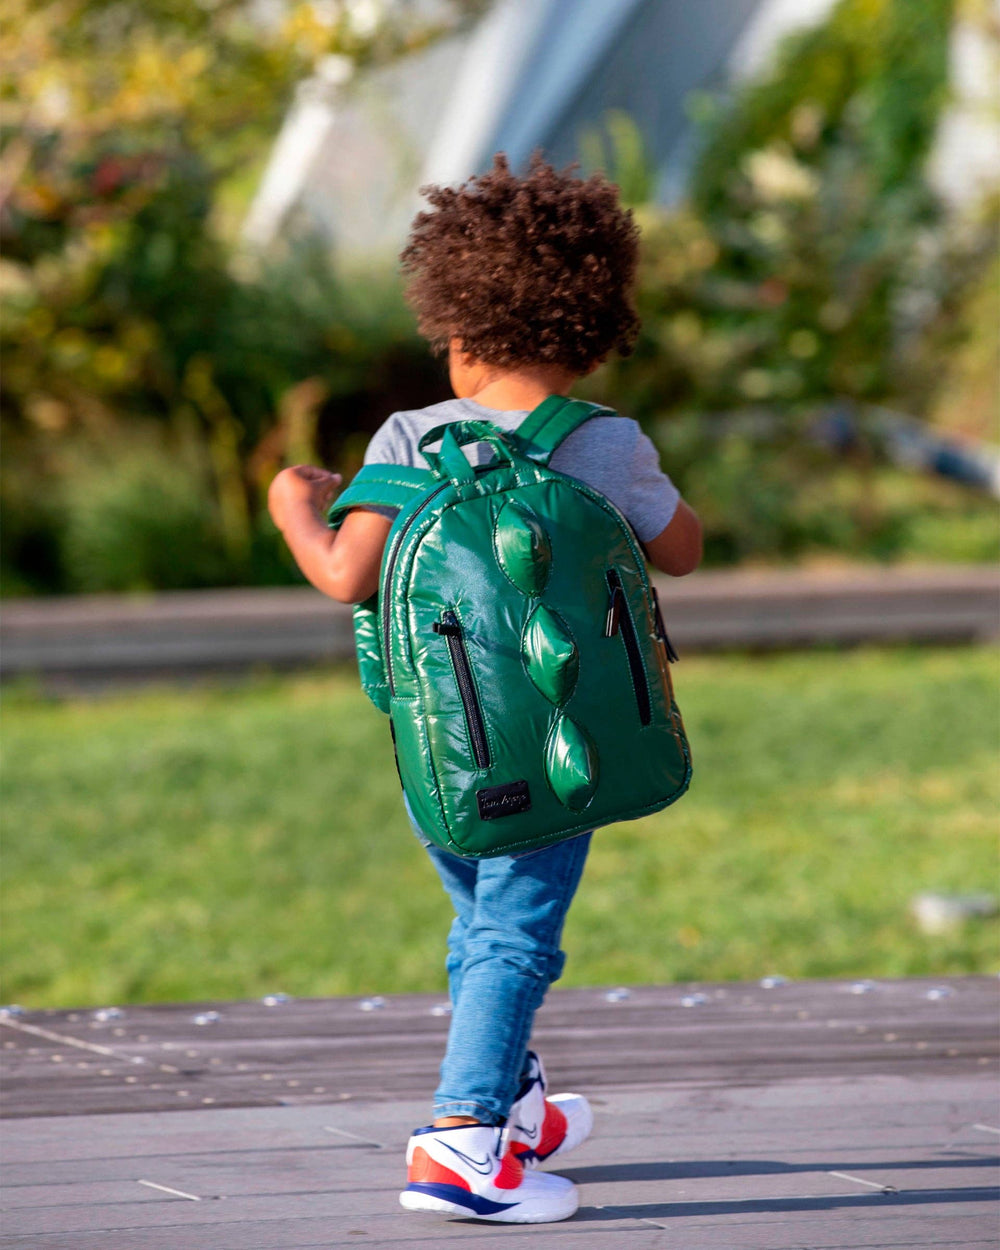 Dino Backpack - Forest Green